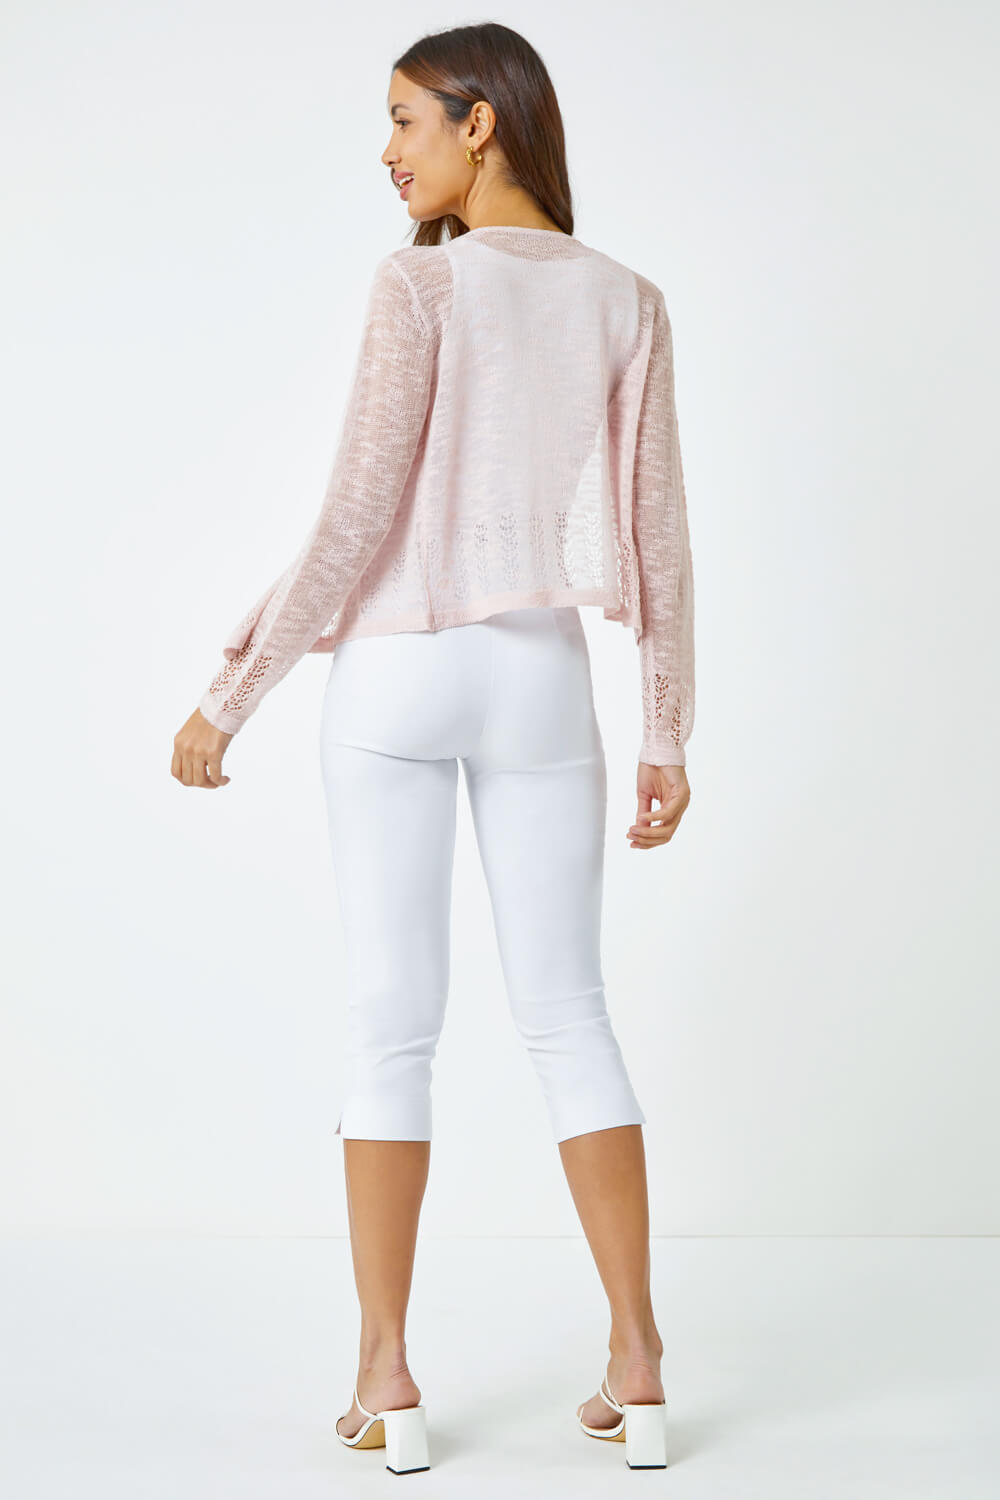 PINK Lightweight Knitted Shrug, Image 3 of 5